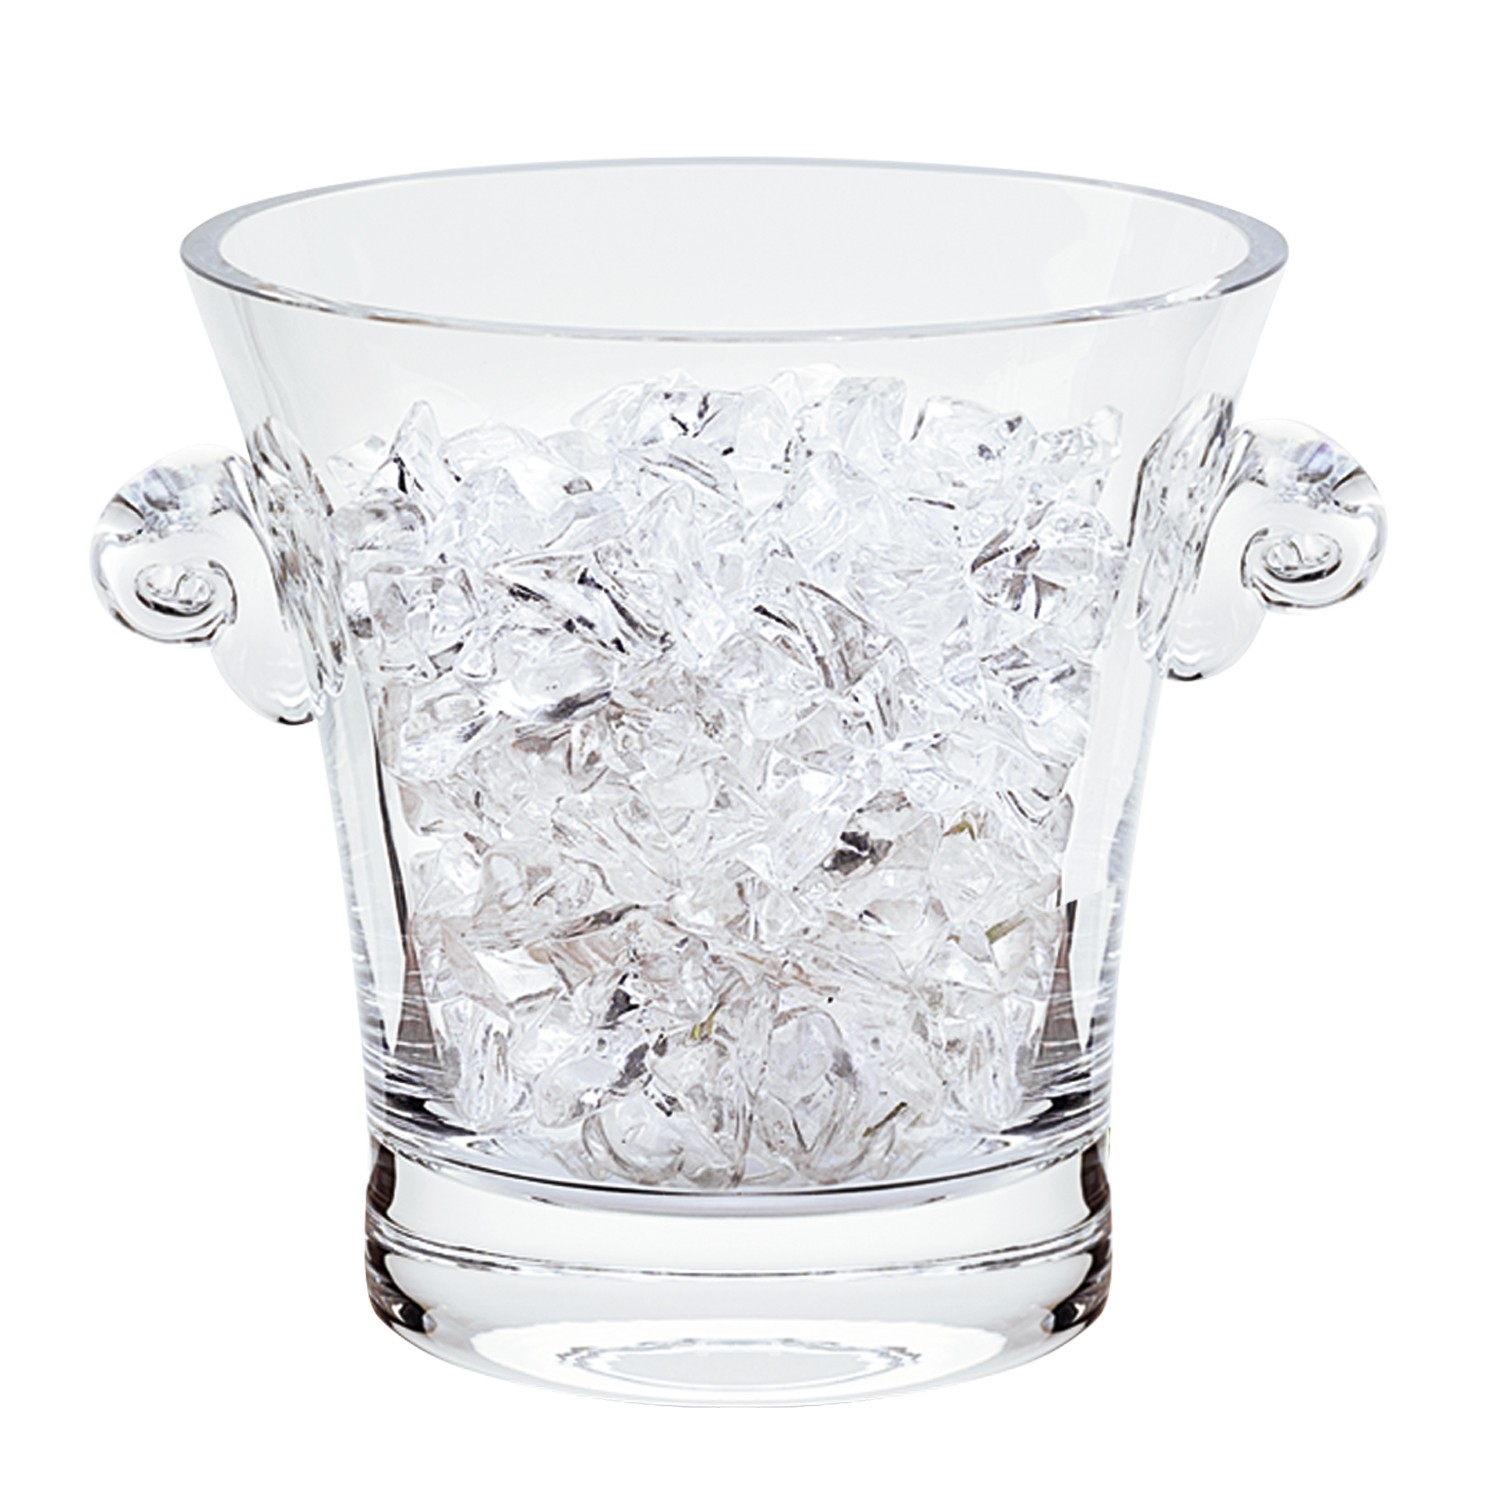 6" Mouth Blown Crystal Ice Bucket